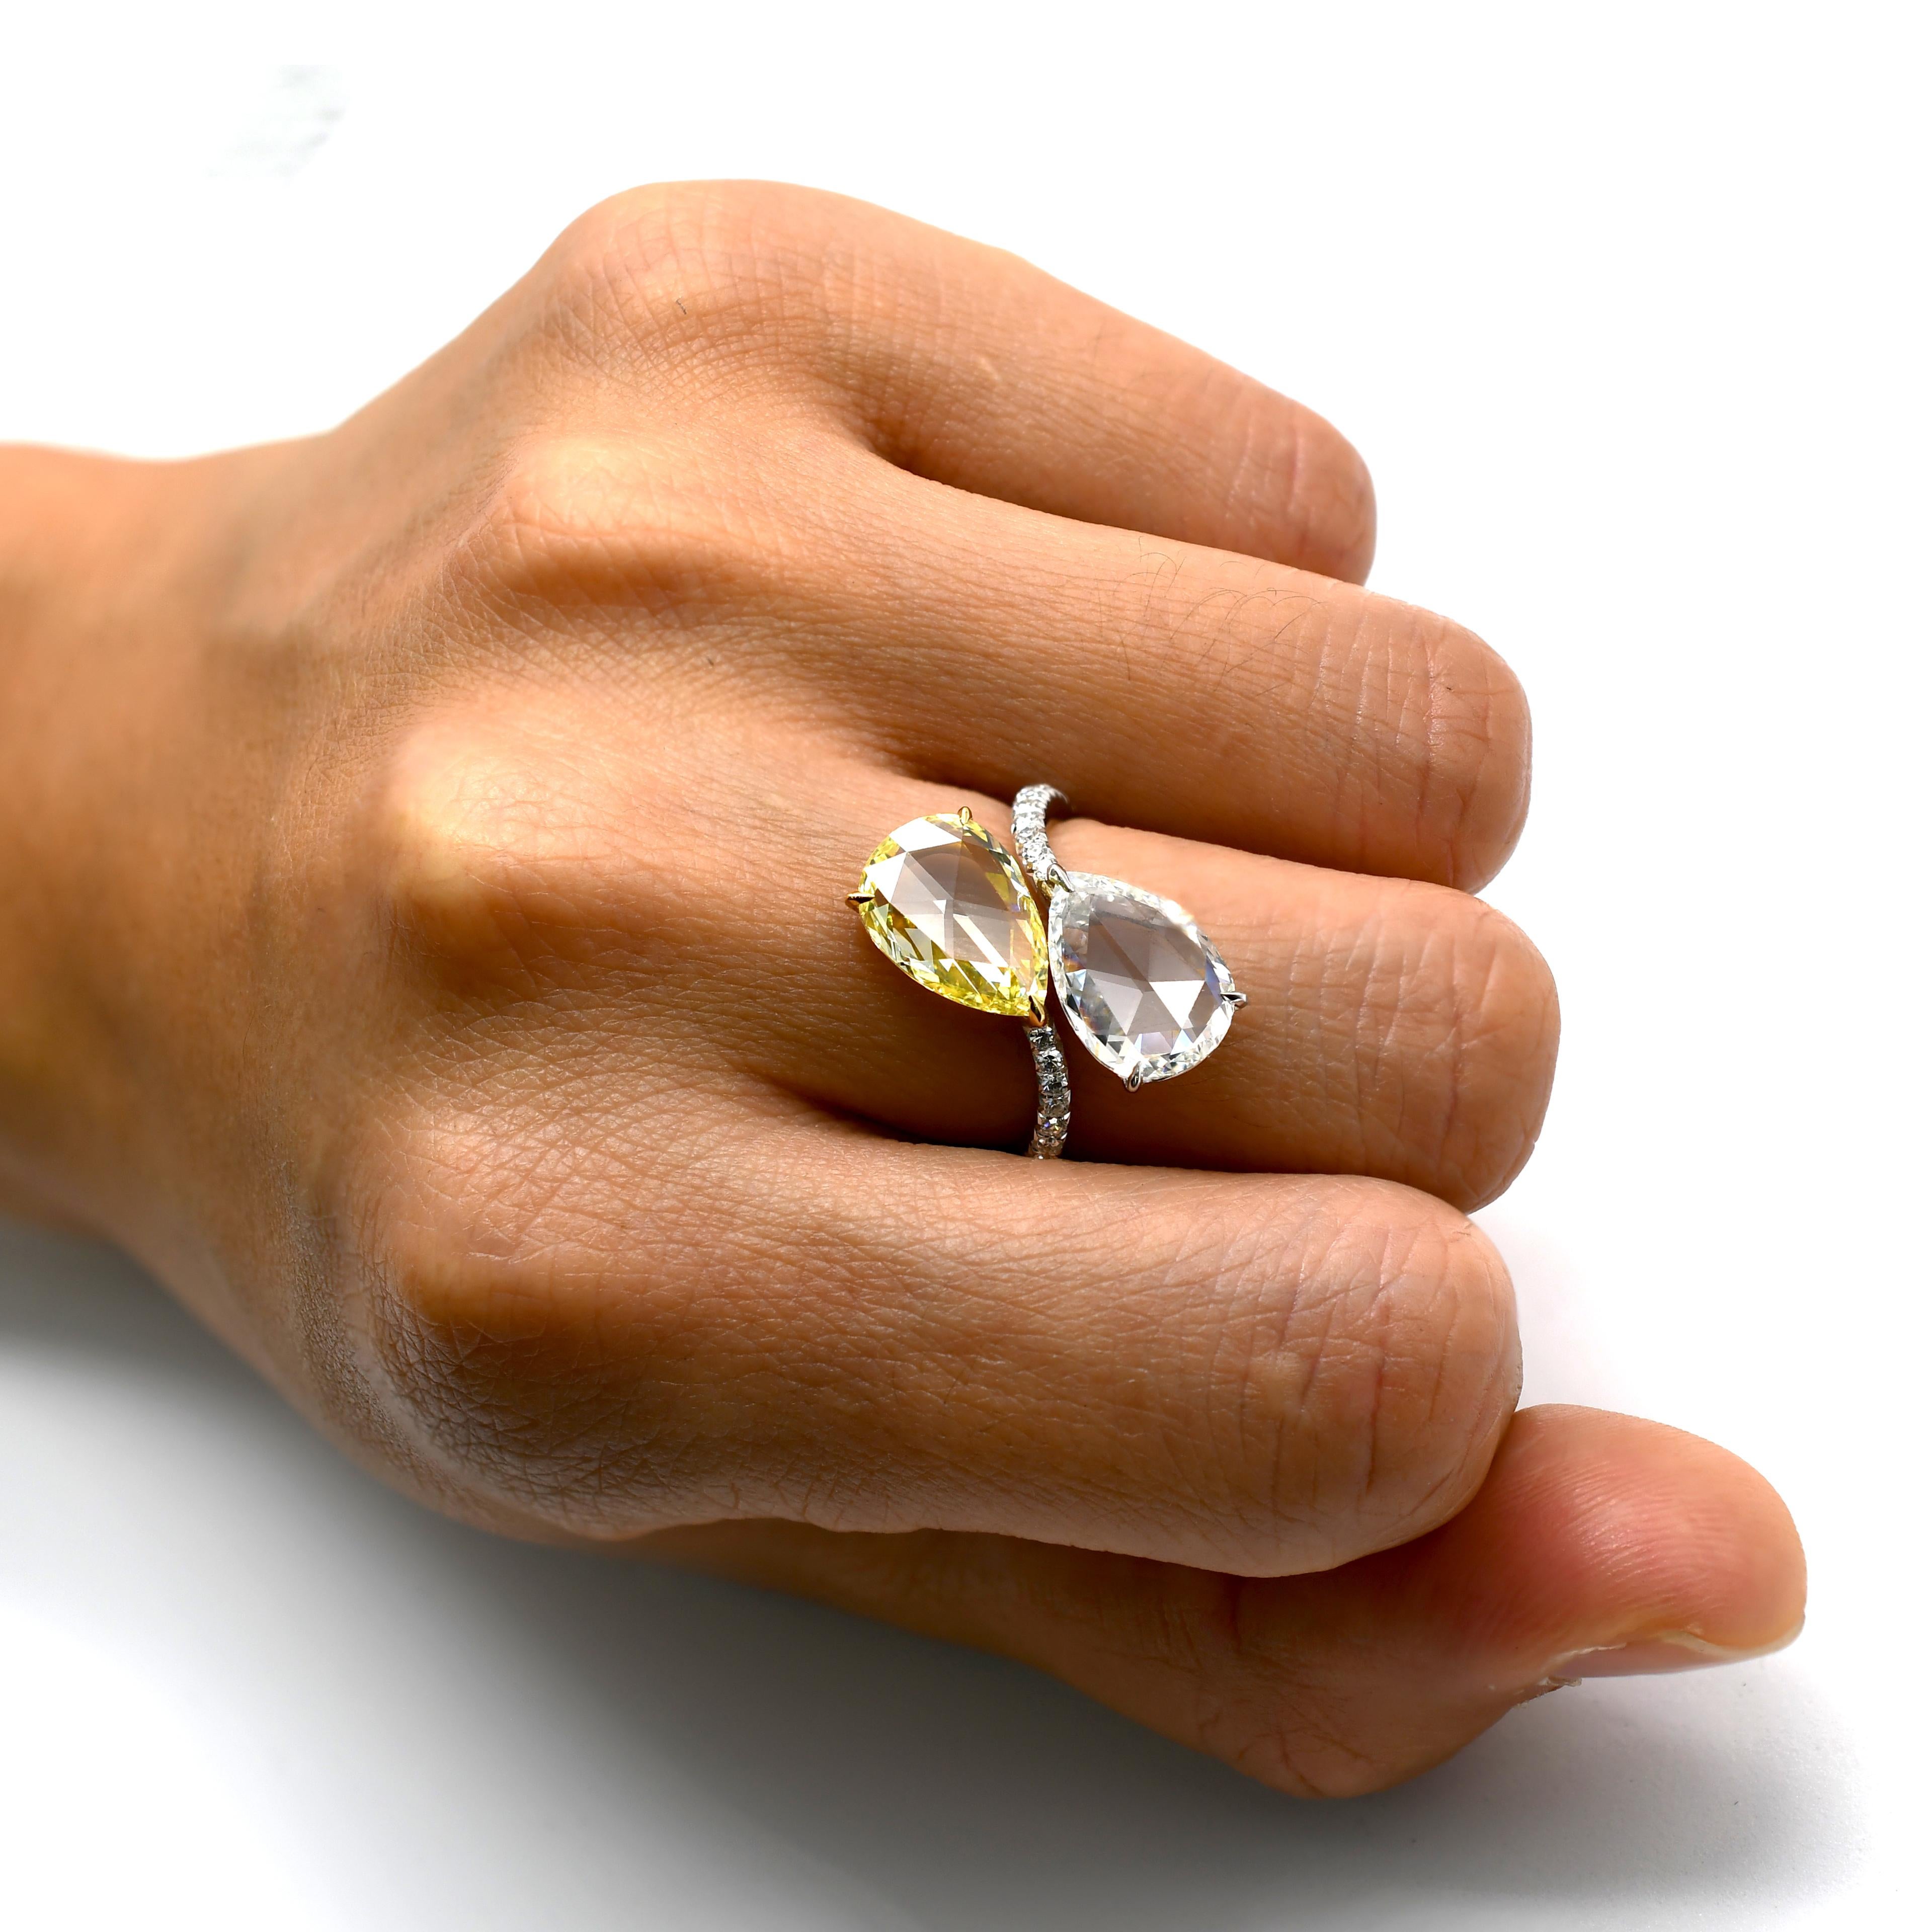 The Contrast Matching of Yellow and White Color Rosecut Diamond in Similar Weight and Diameter is Rare and Noticeable.
The Natural Yellow Rosecut Pear is 1.84 Carat - VVS Clarity and White Rosecut Pear is 1.93 Carat -VS Clarity, Surrounded by White